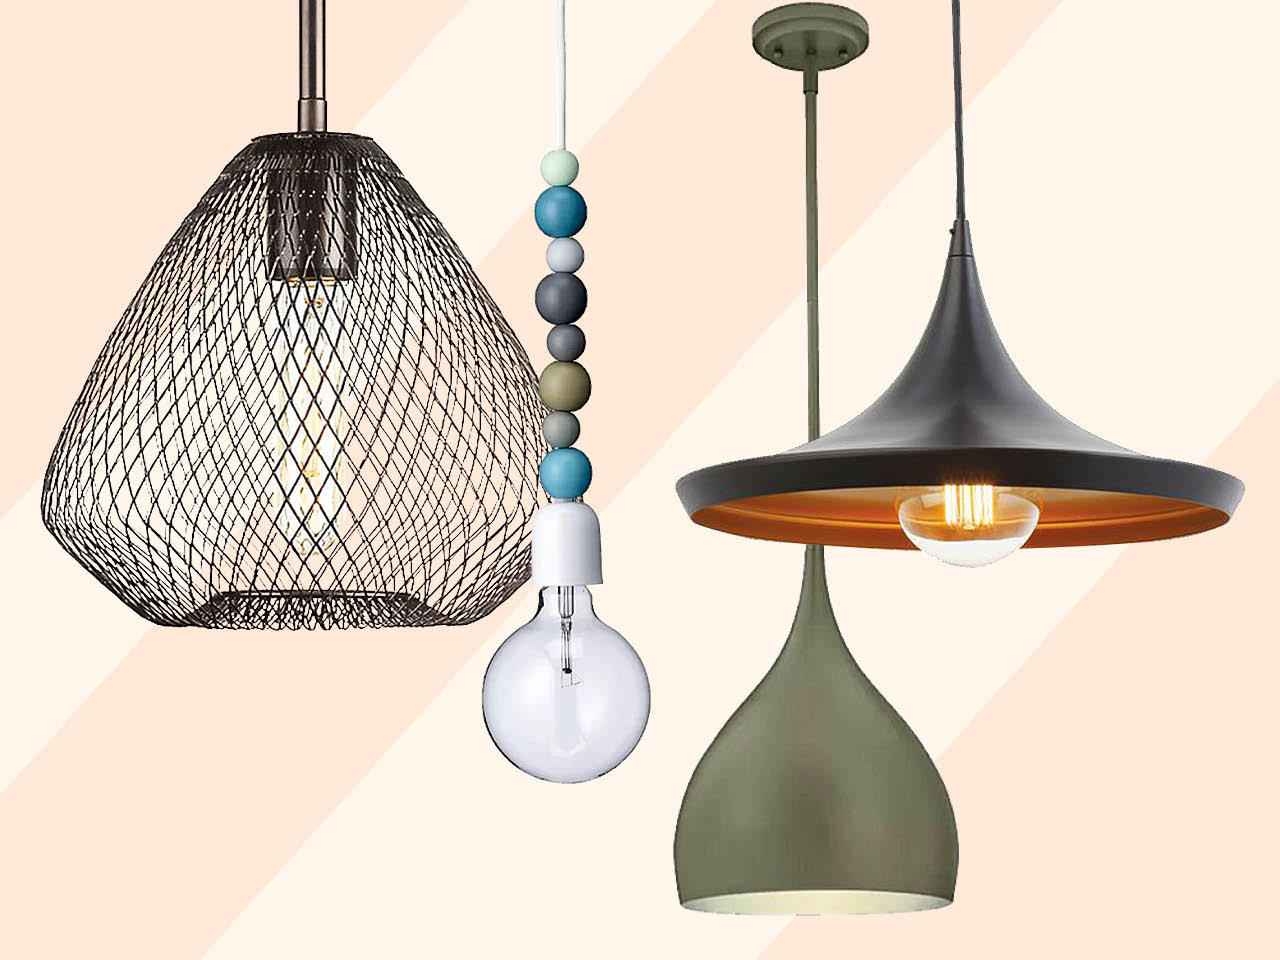 50 Gorgeous Pendant Lights For Every Room In Your House For Under $100